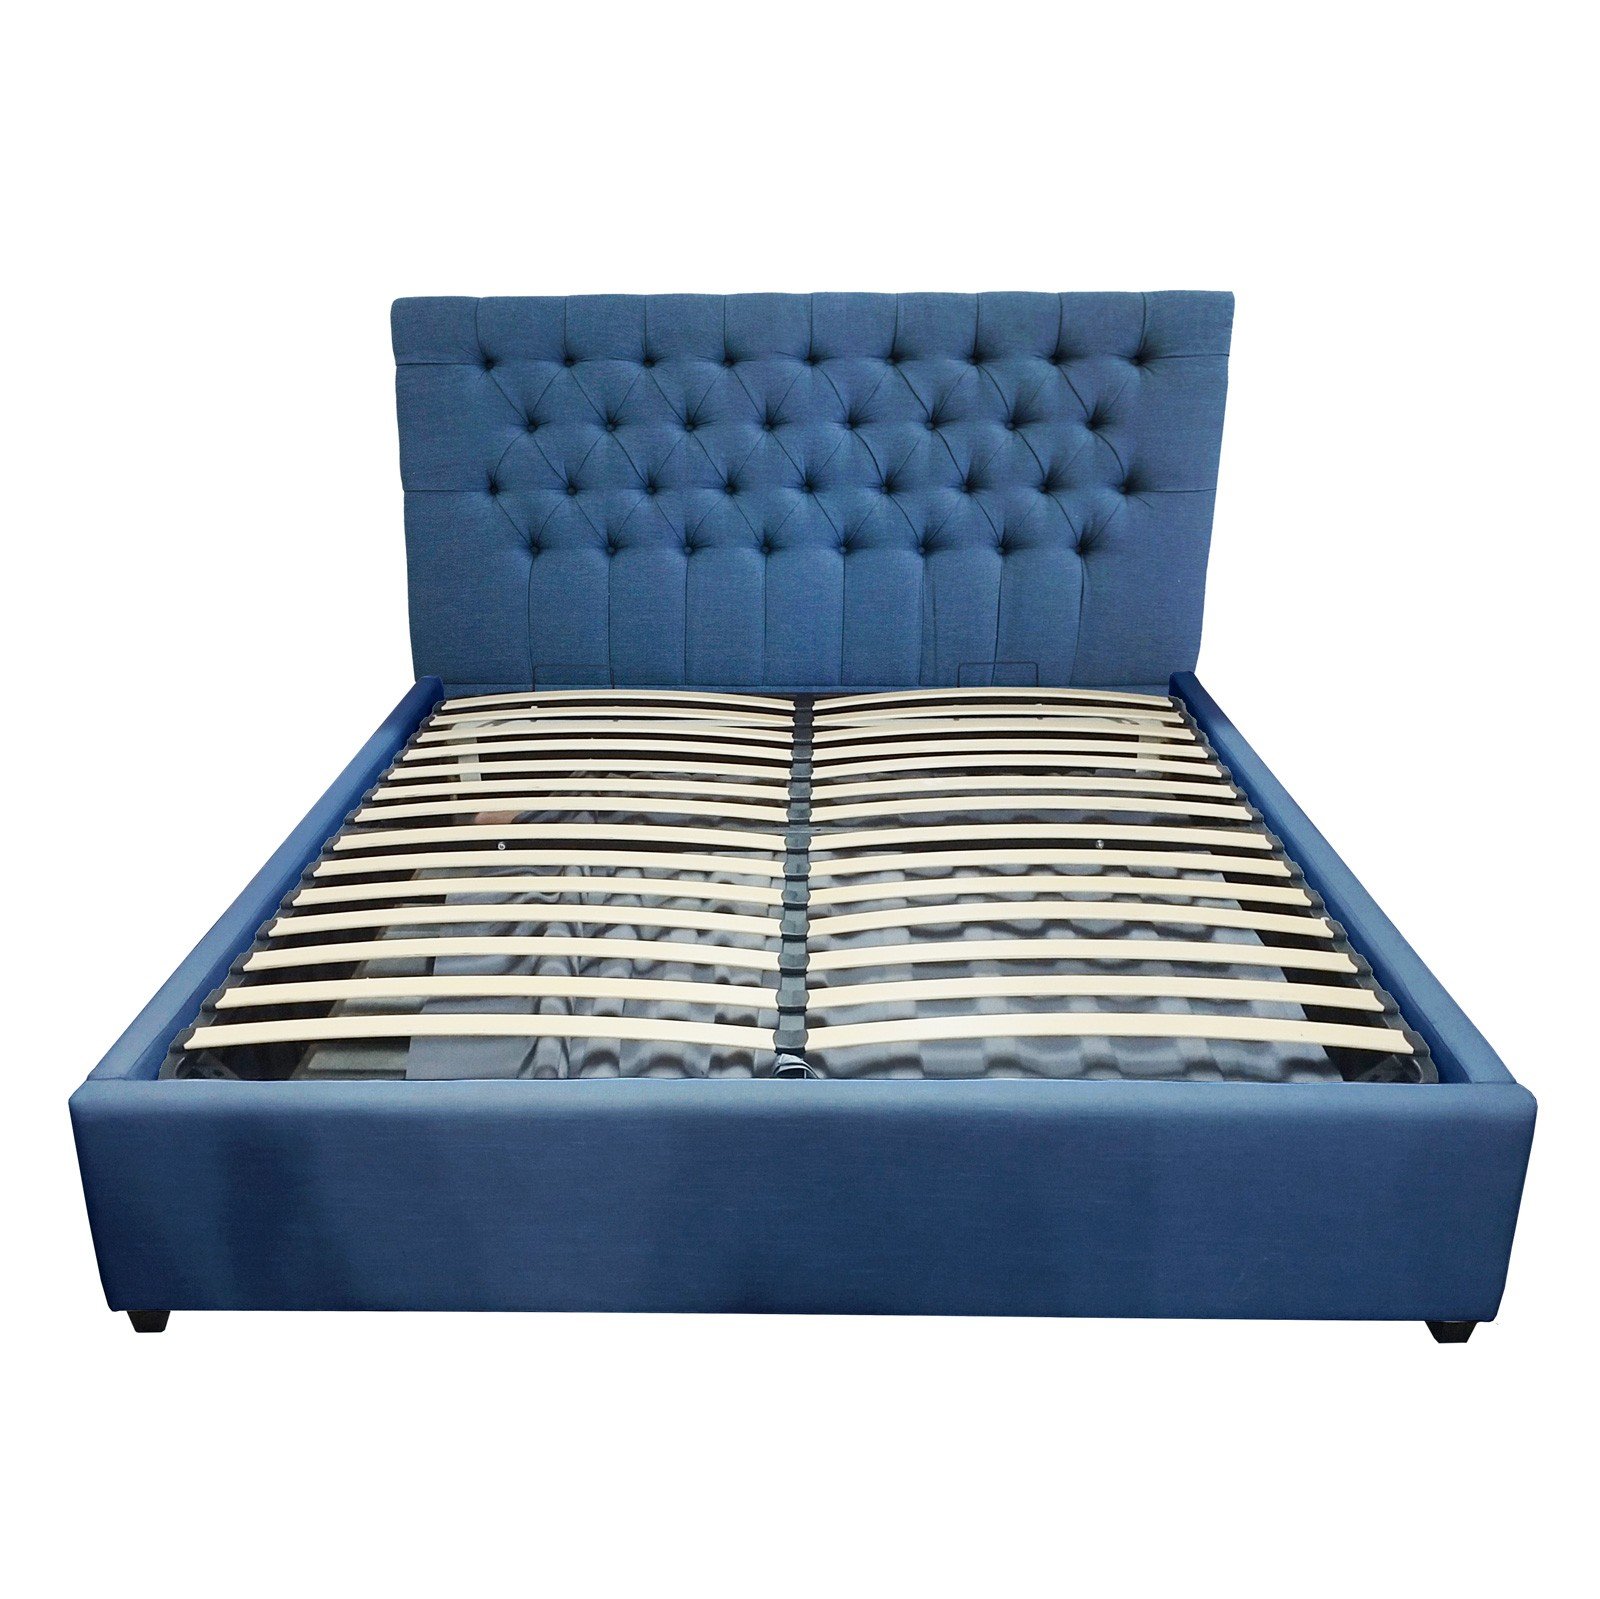 Georgia Queen Gas Lift Bed, Lift Storage Bed Frame Queen